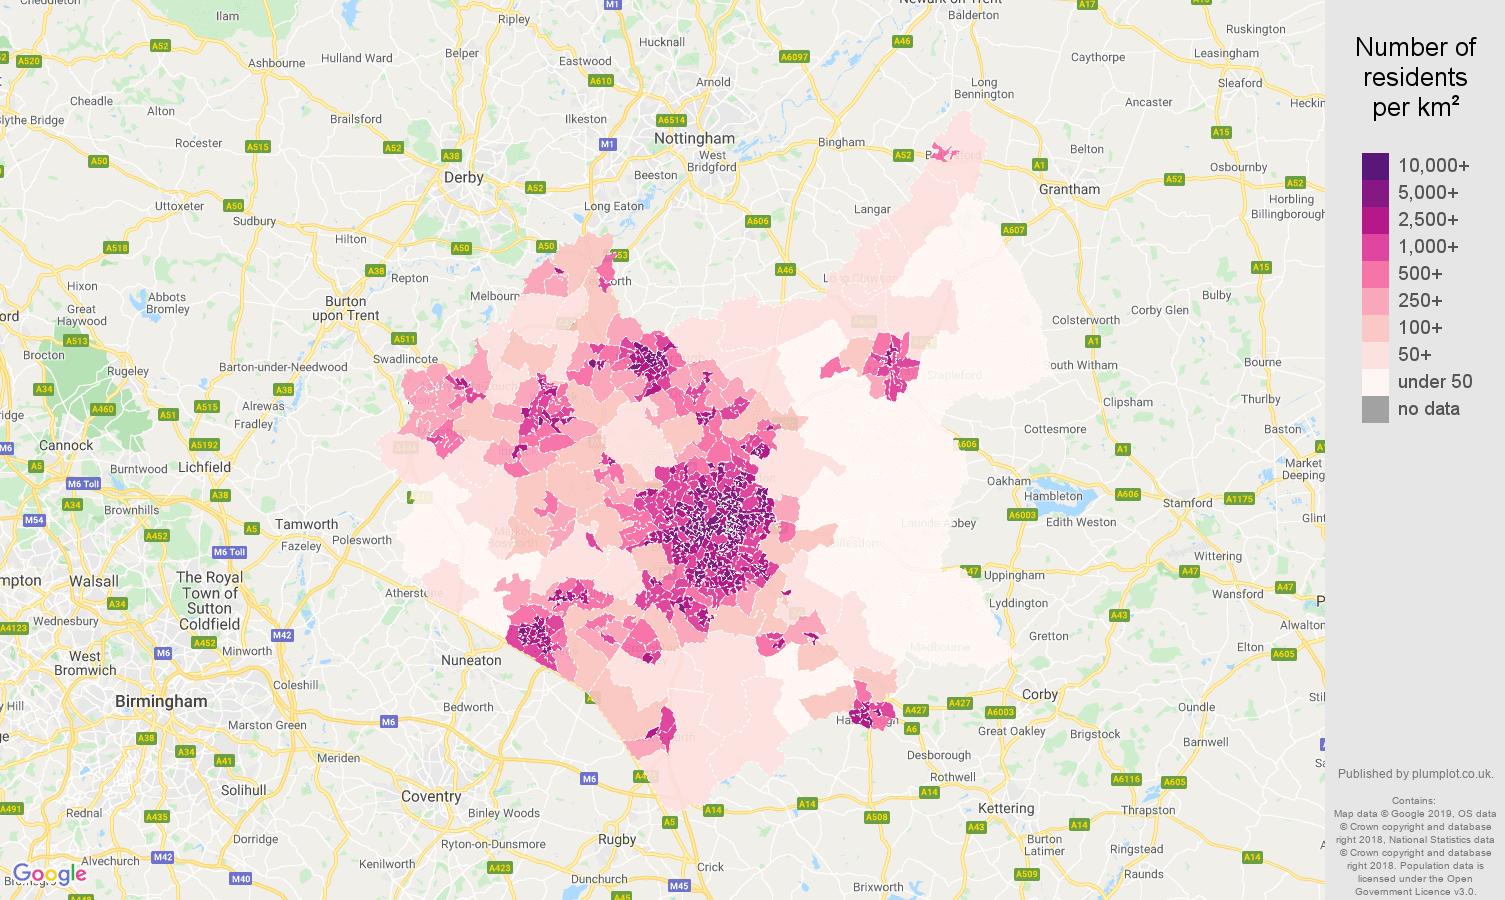 Leicestershire population density map